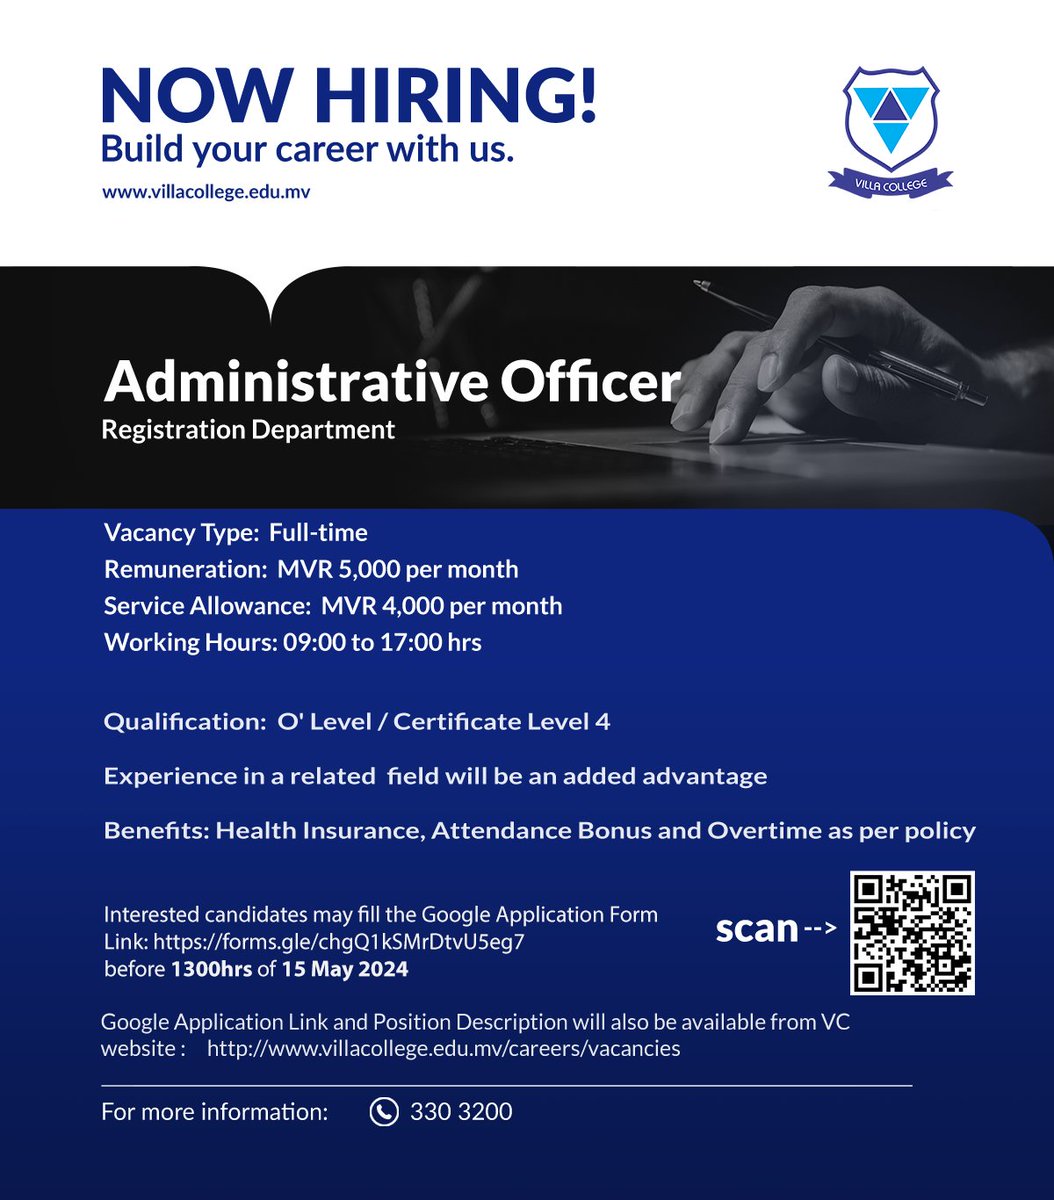 Villa College is hiring! Administrative Officer, REG - forms.gle/chgQ1kSMrDtvU5… Interested candidates may submit the Application form, CV, certificates, transcripts, and other relevant documents through the Google link above.